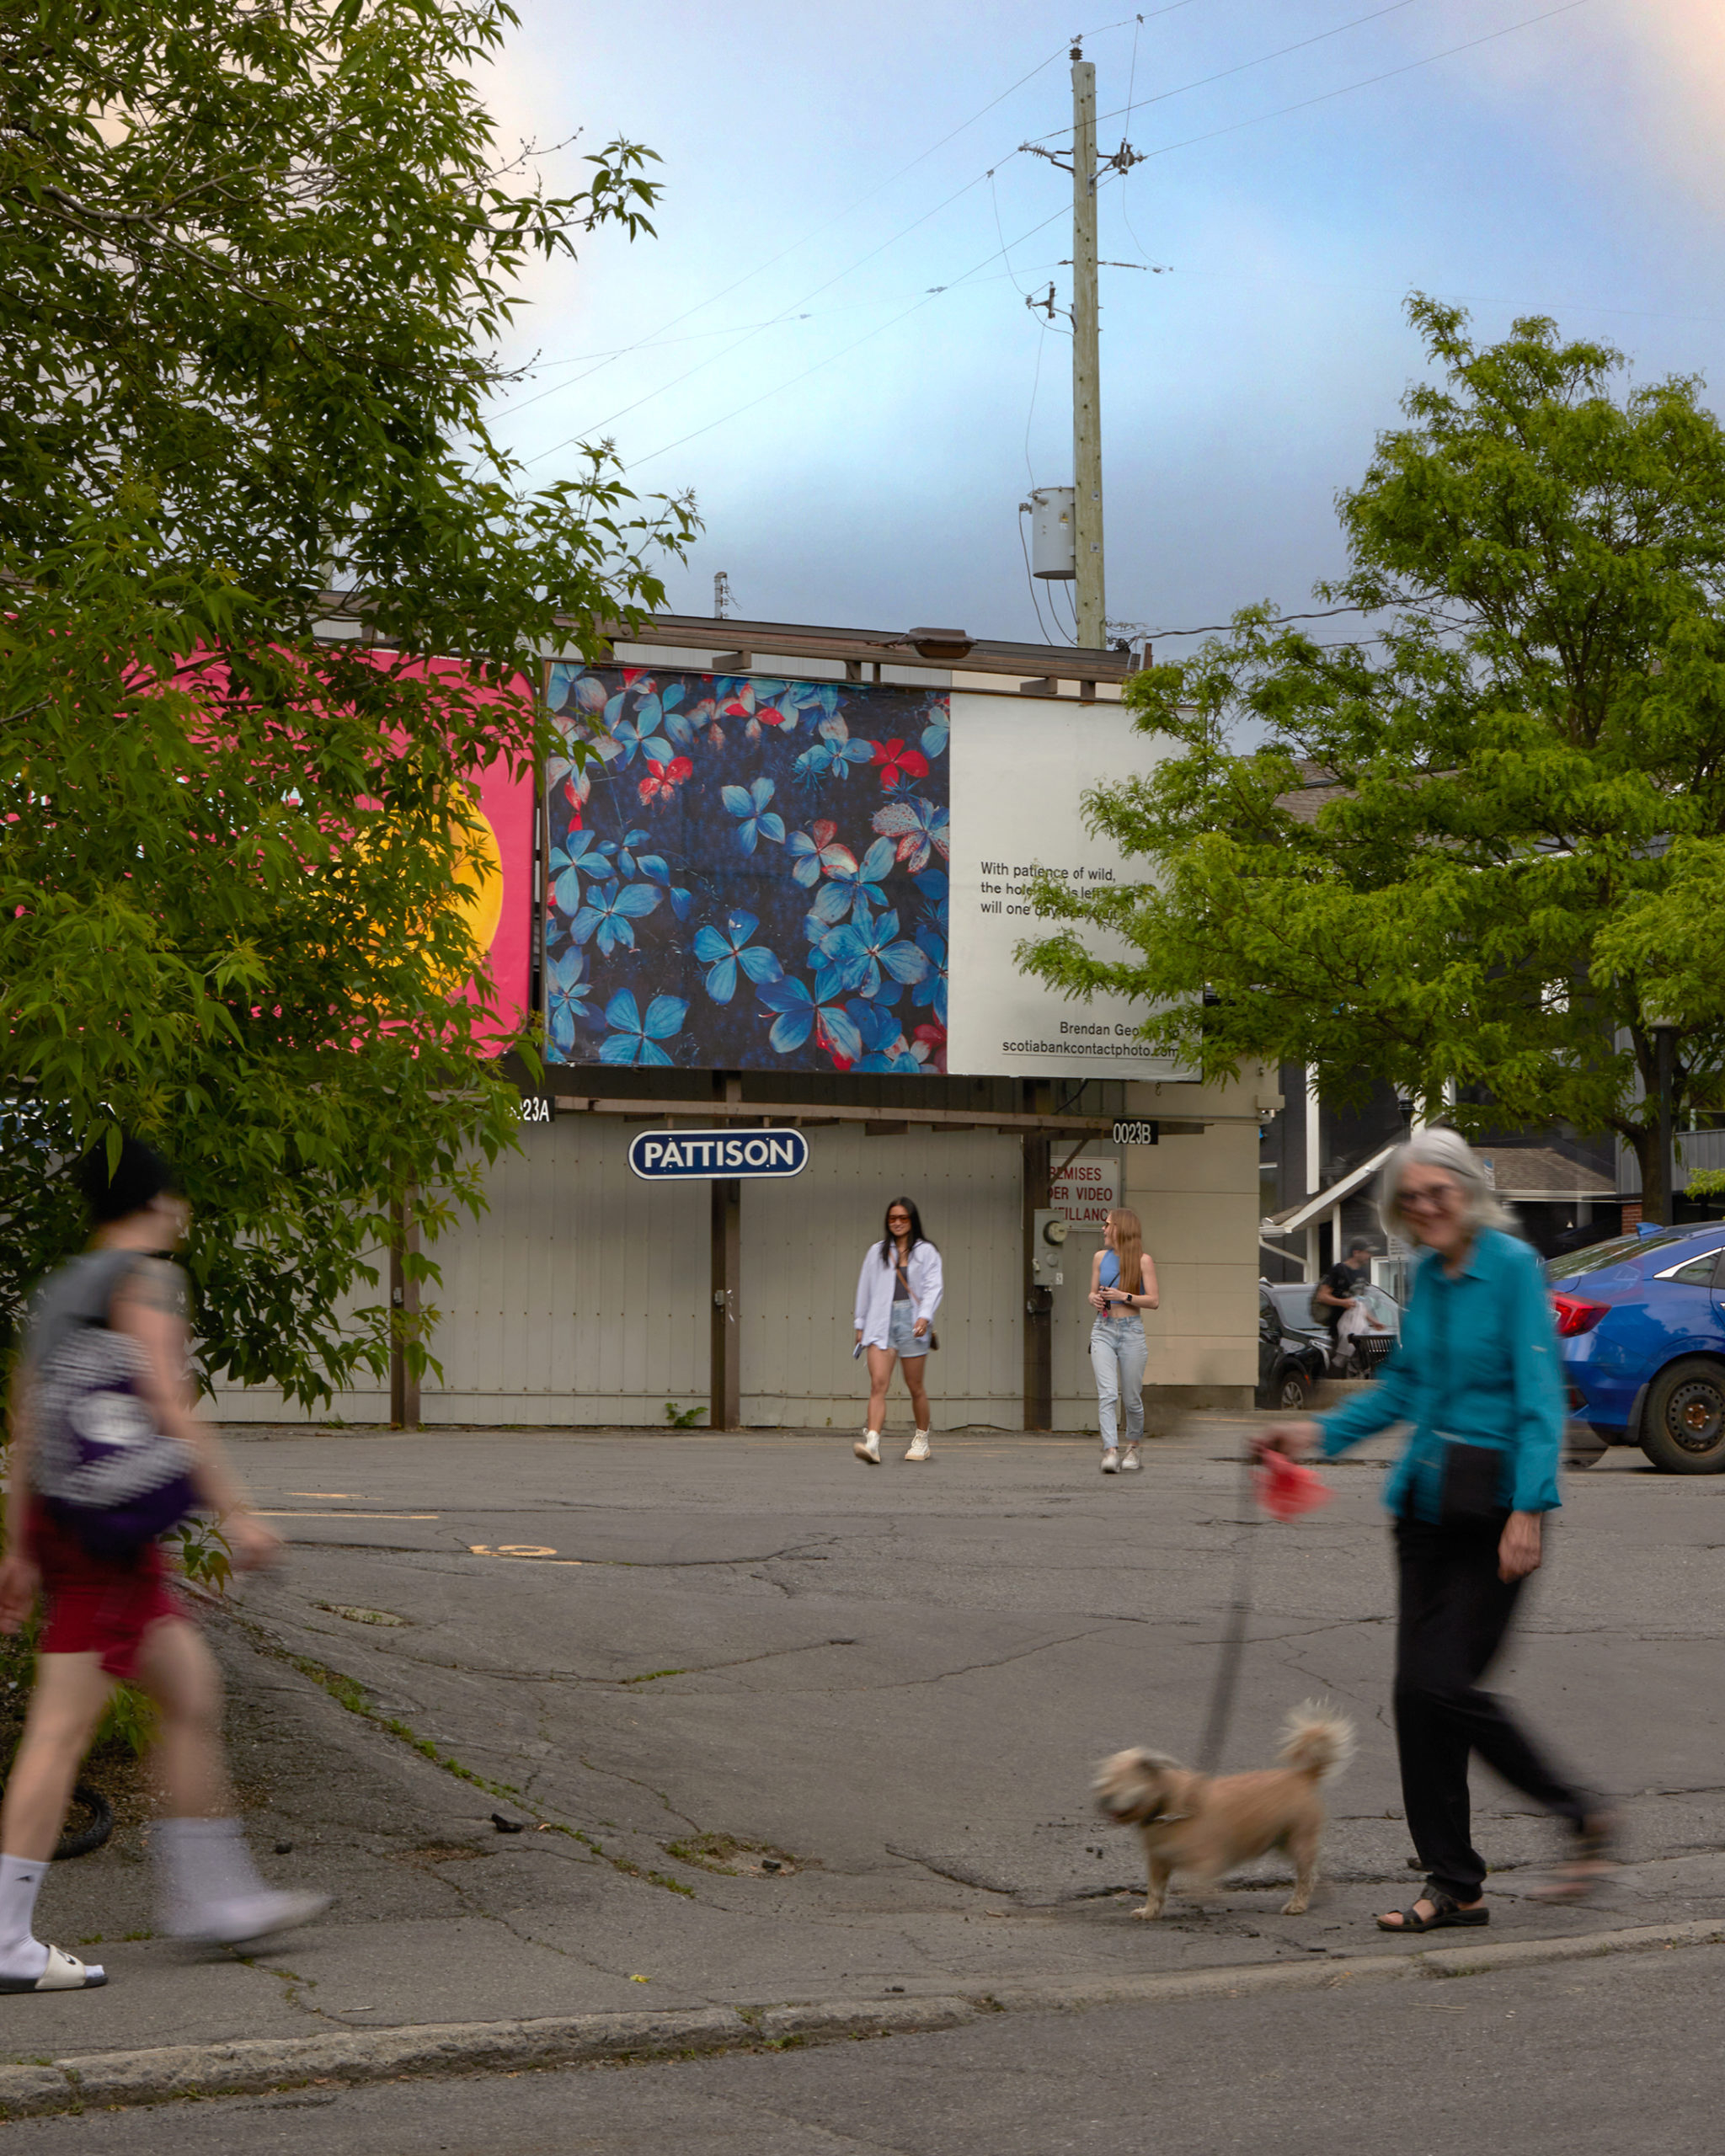     Brendan George Ko, The Forest is Wired for Wisdom, installation on billboards in Ottawa and 9 other Canadian cities, 2022. Courtesy of the artist and CONTACT. Photo: Kaya Comeau

